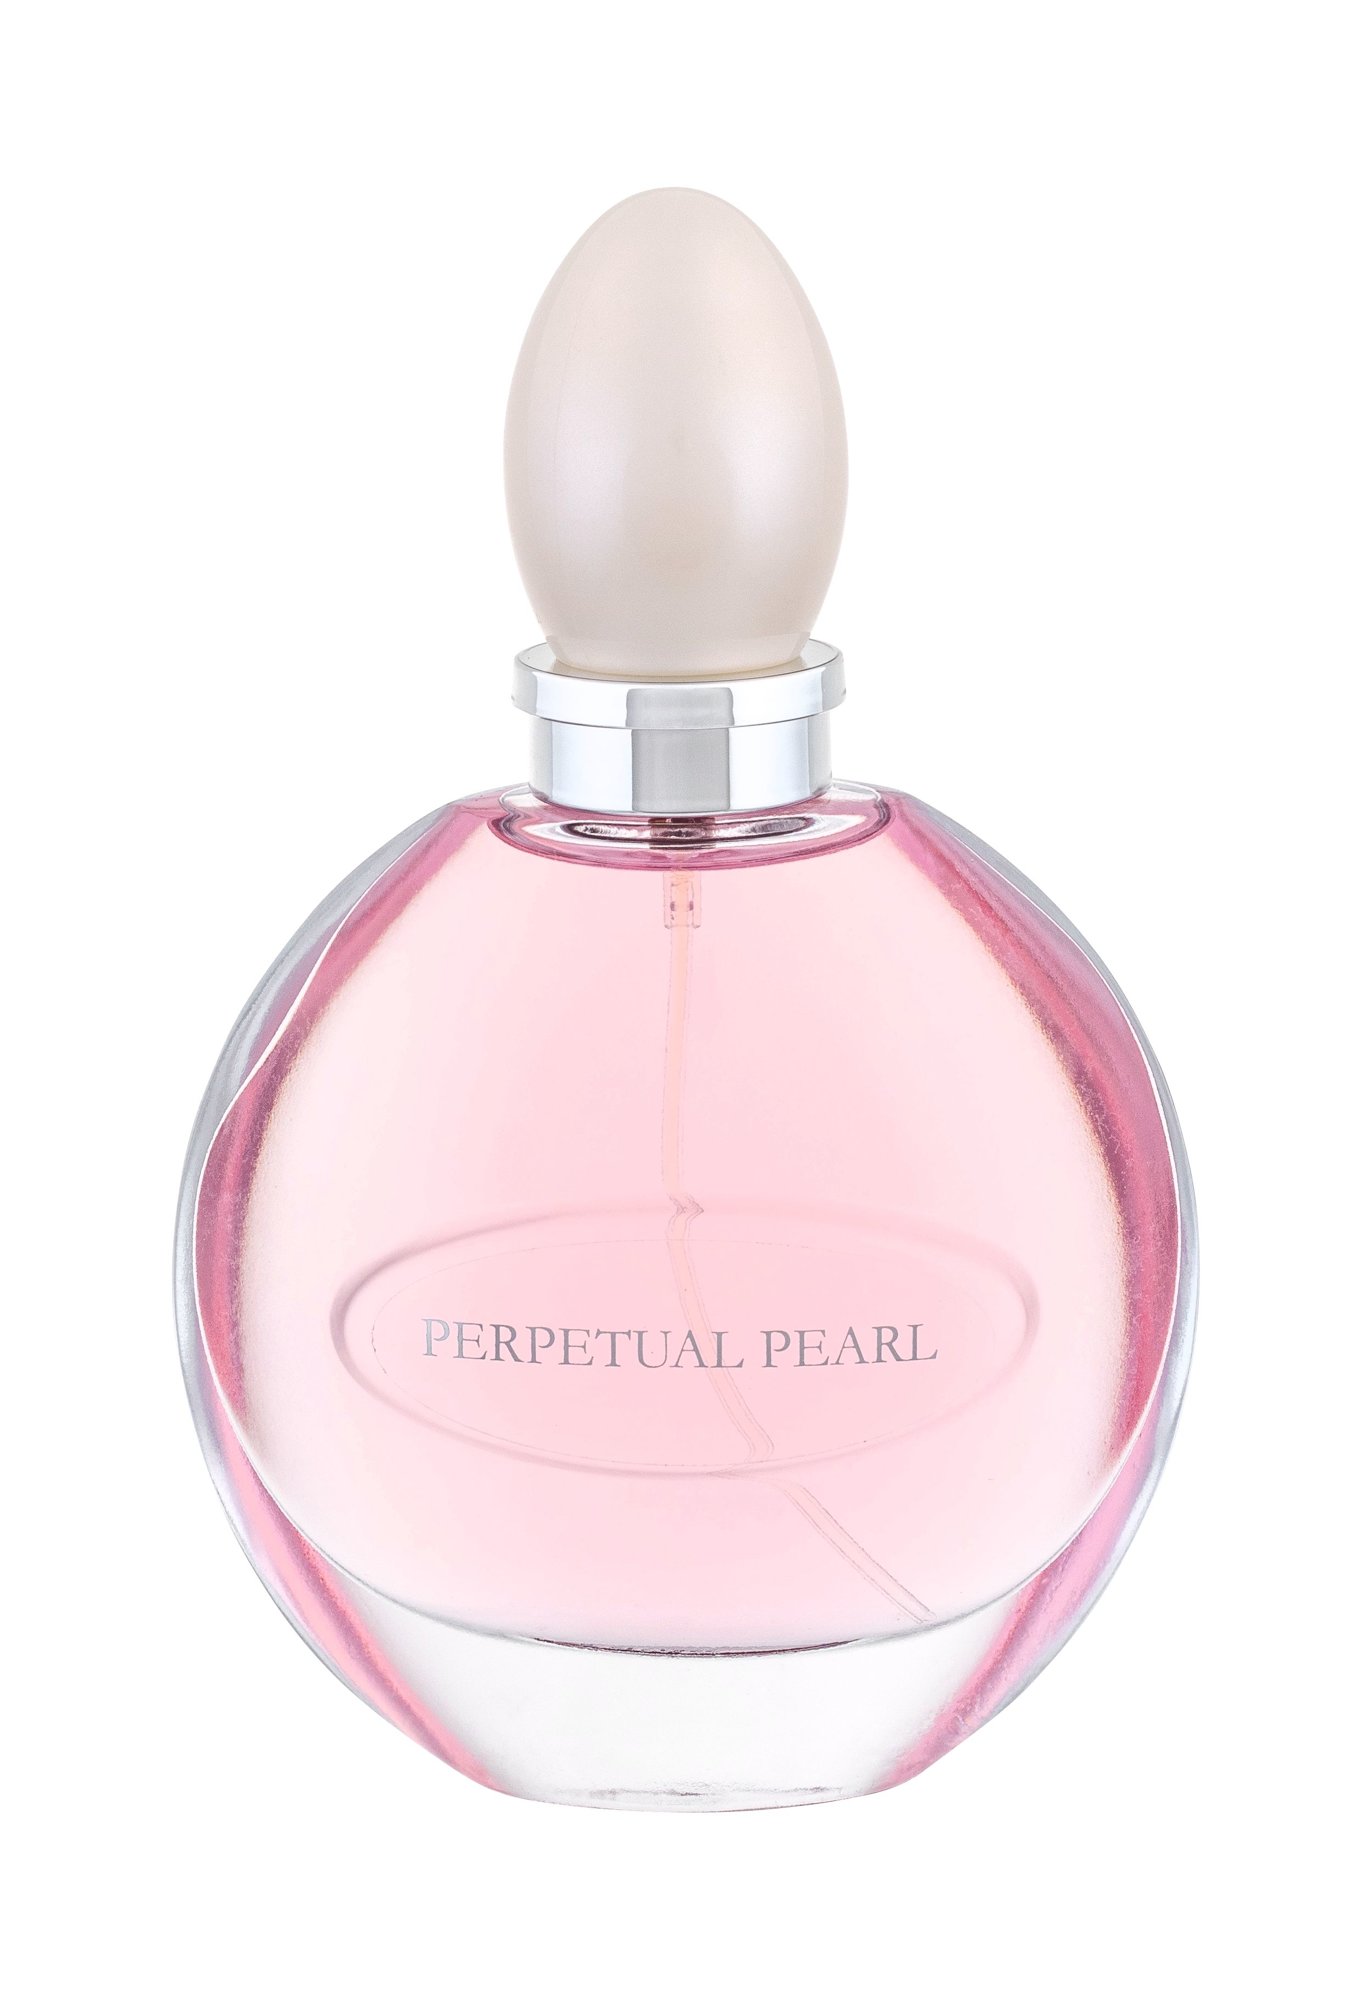 Jeanne Arthes Perpetual Pearl